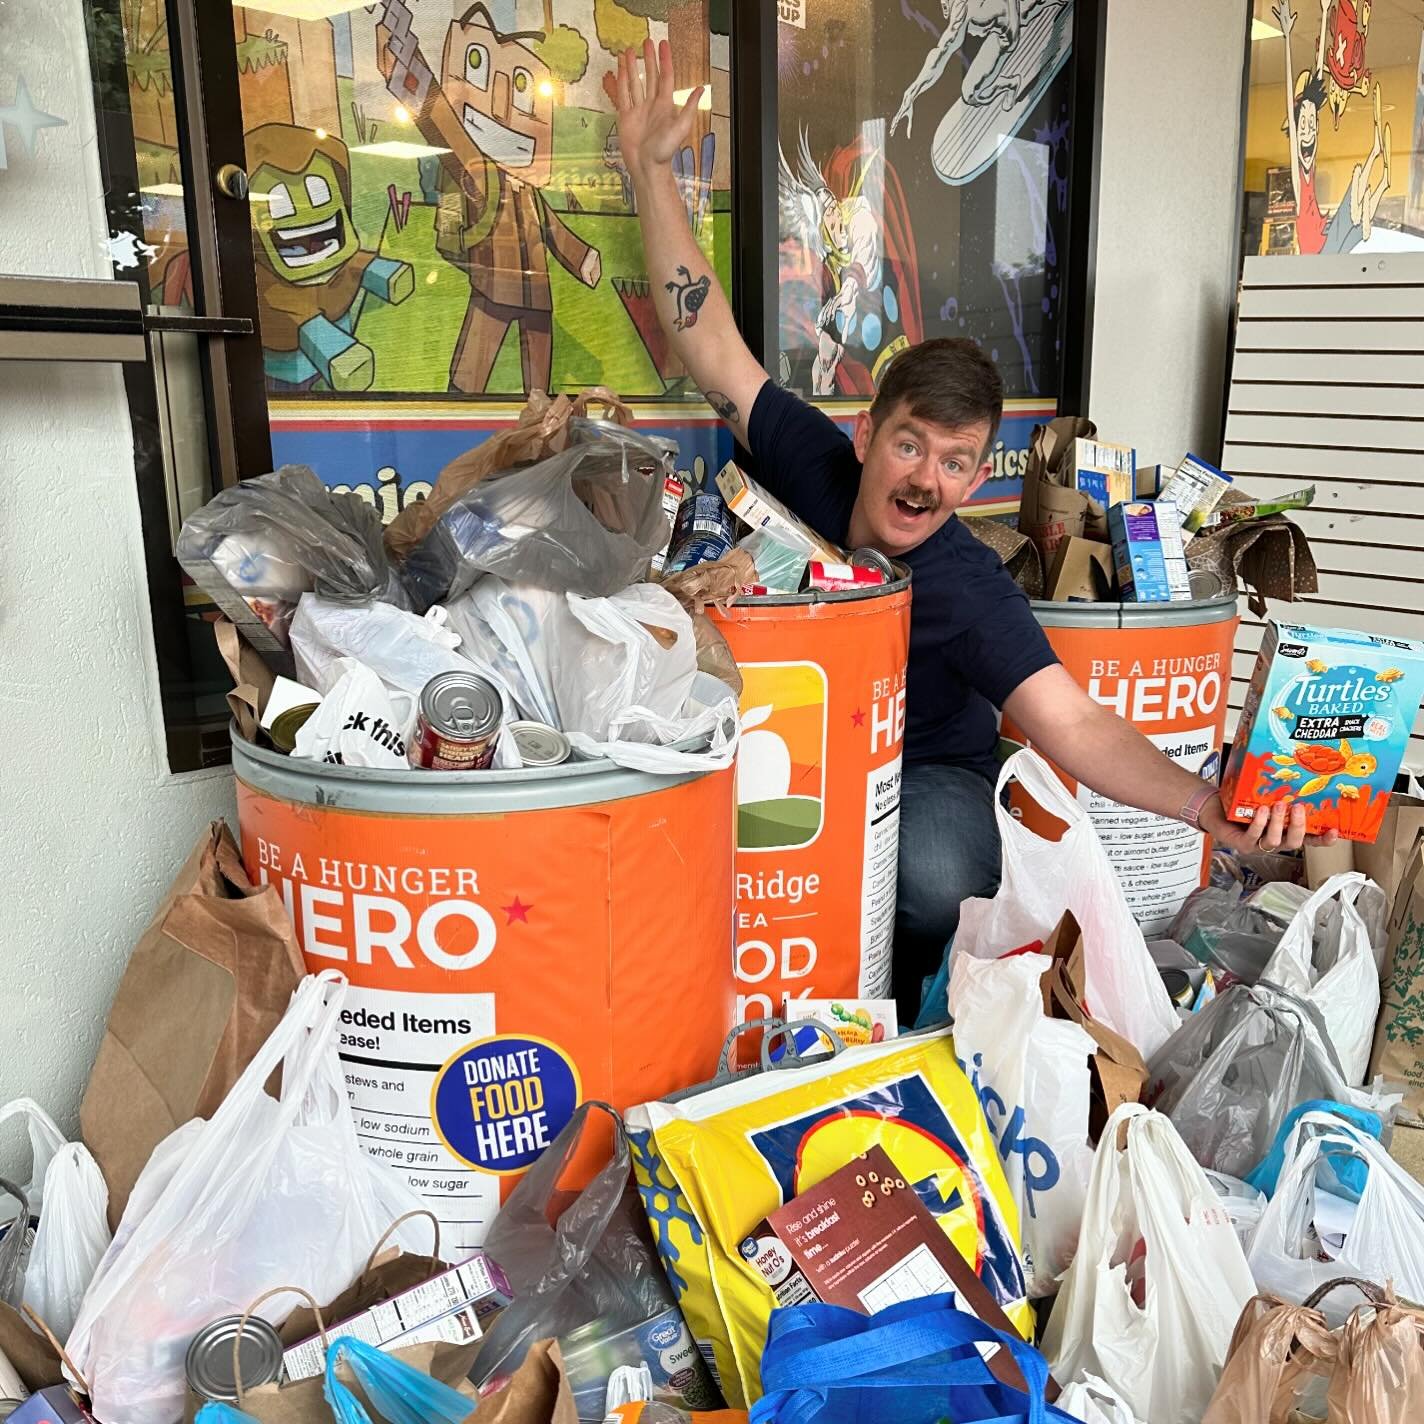 Wowee wow wow wow! What an incredible Free Comic Book Day so far, and what an incredible spread of donations for the Blue Ridge Area Food Bank (Dave is shown for scale and not included). Thank you so much to all the friendly faces we&rsquo;ve seen so